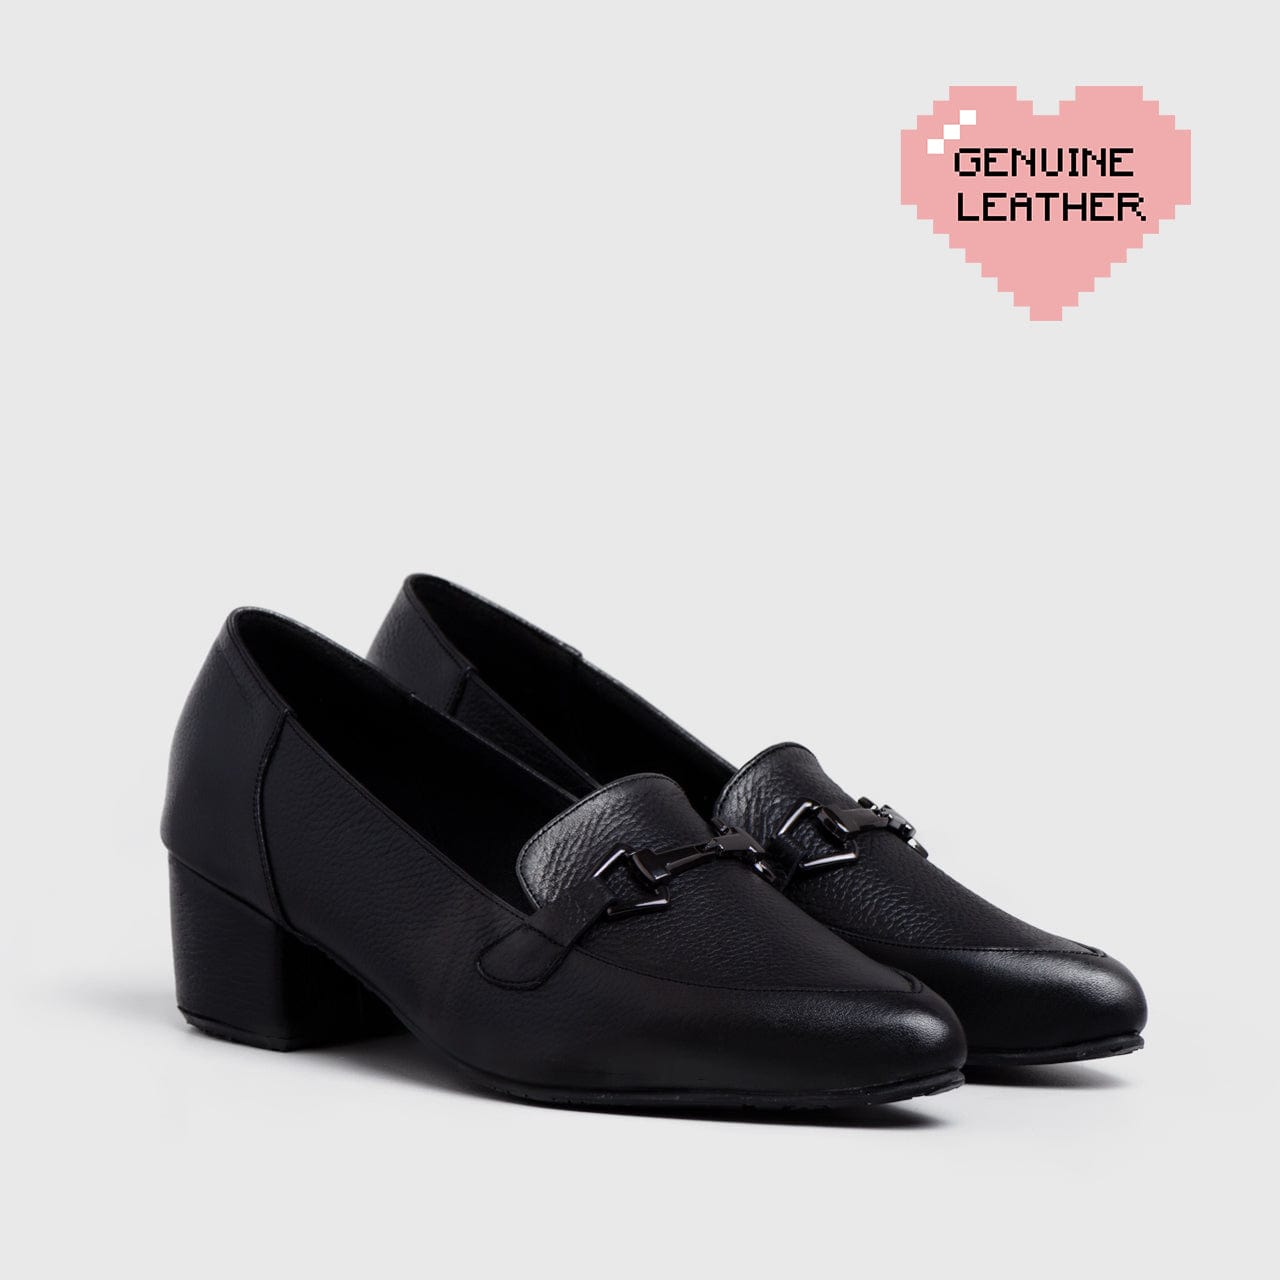 Adorable Projects Official 37 Mulligan Heels Genuine Leather Black